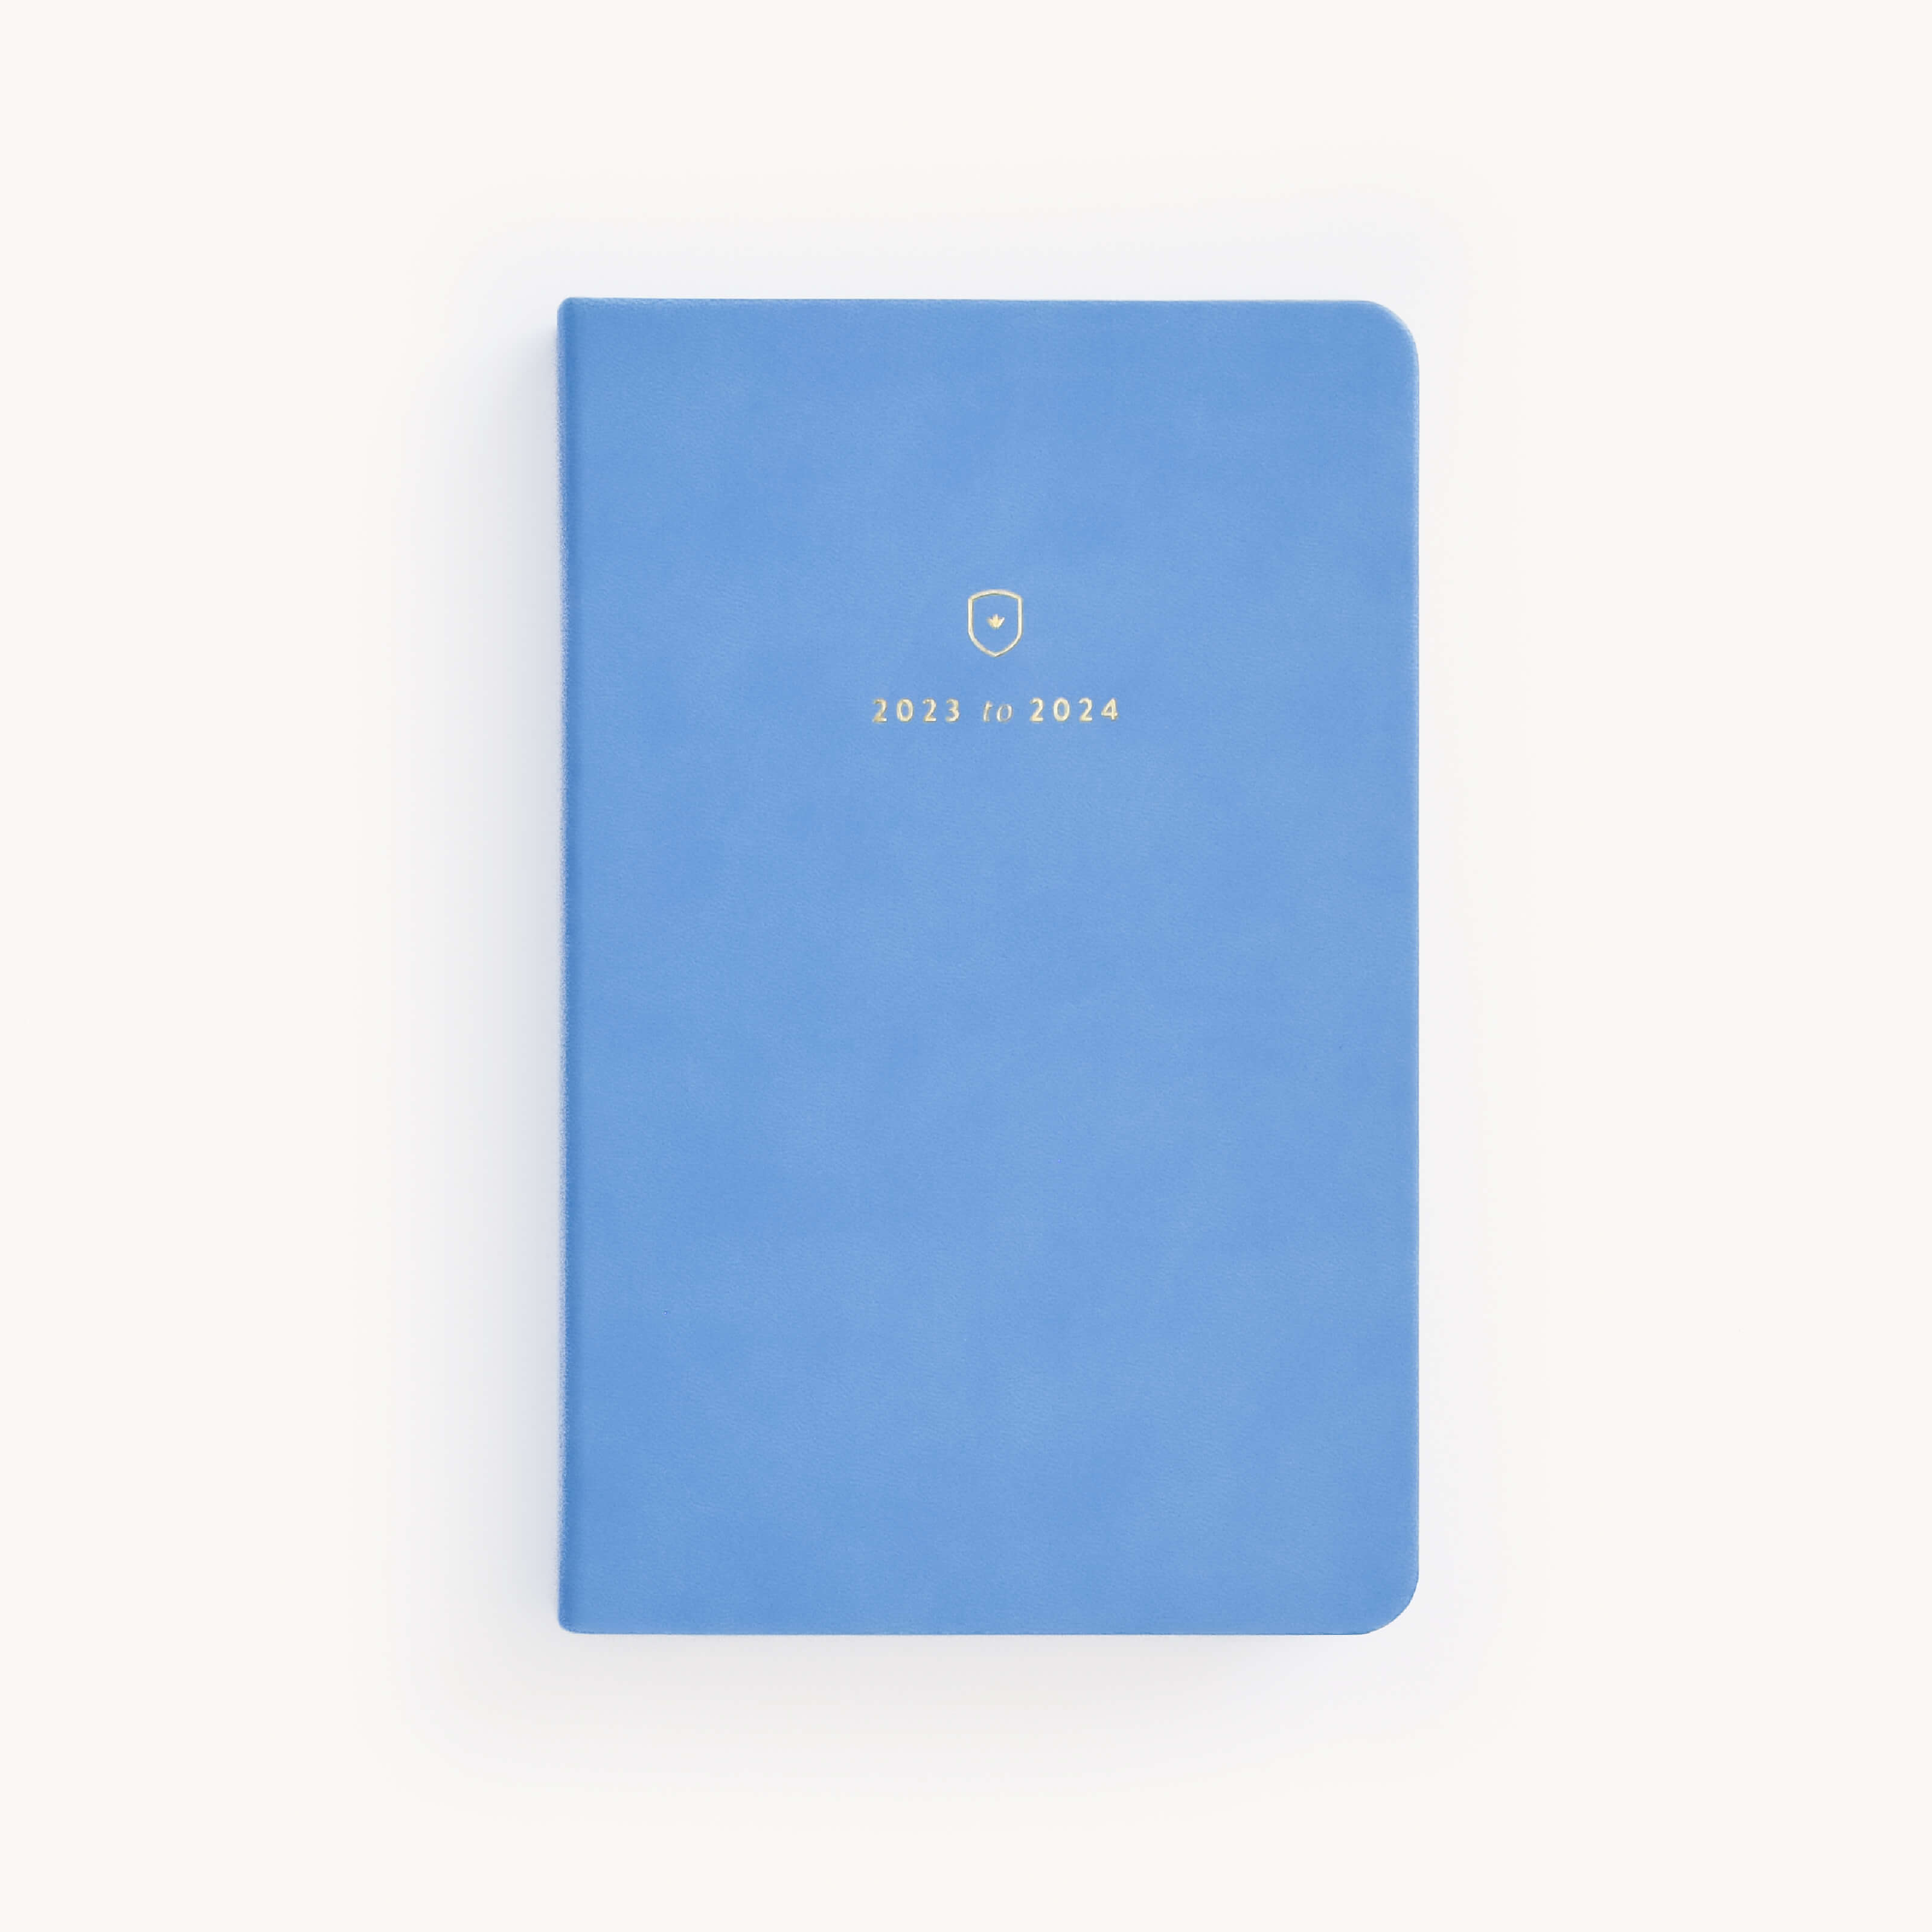 Powder Blue Pantone Themed Notebook 365 Pages Daily Planner